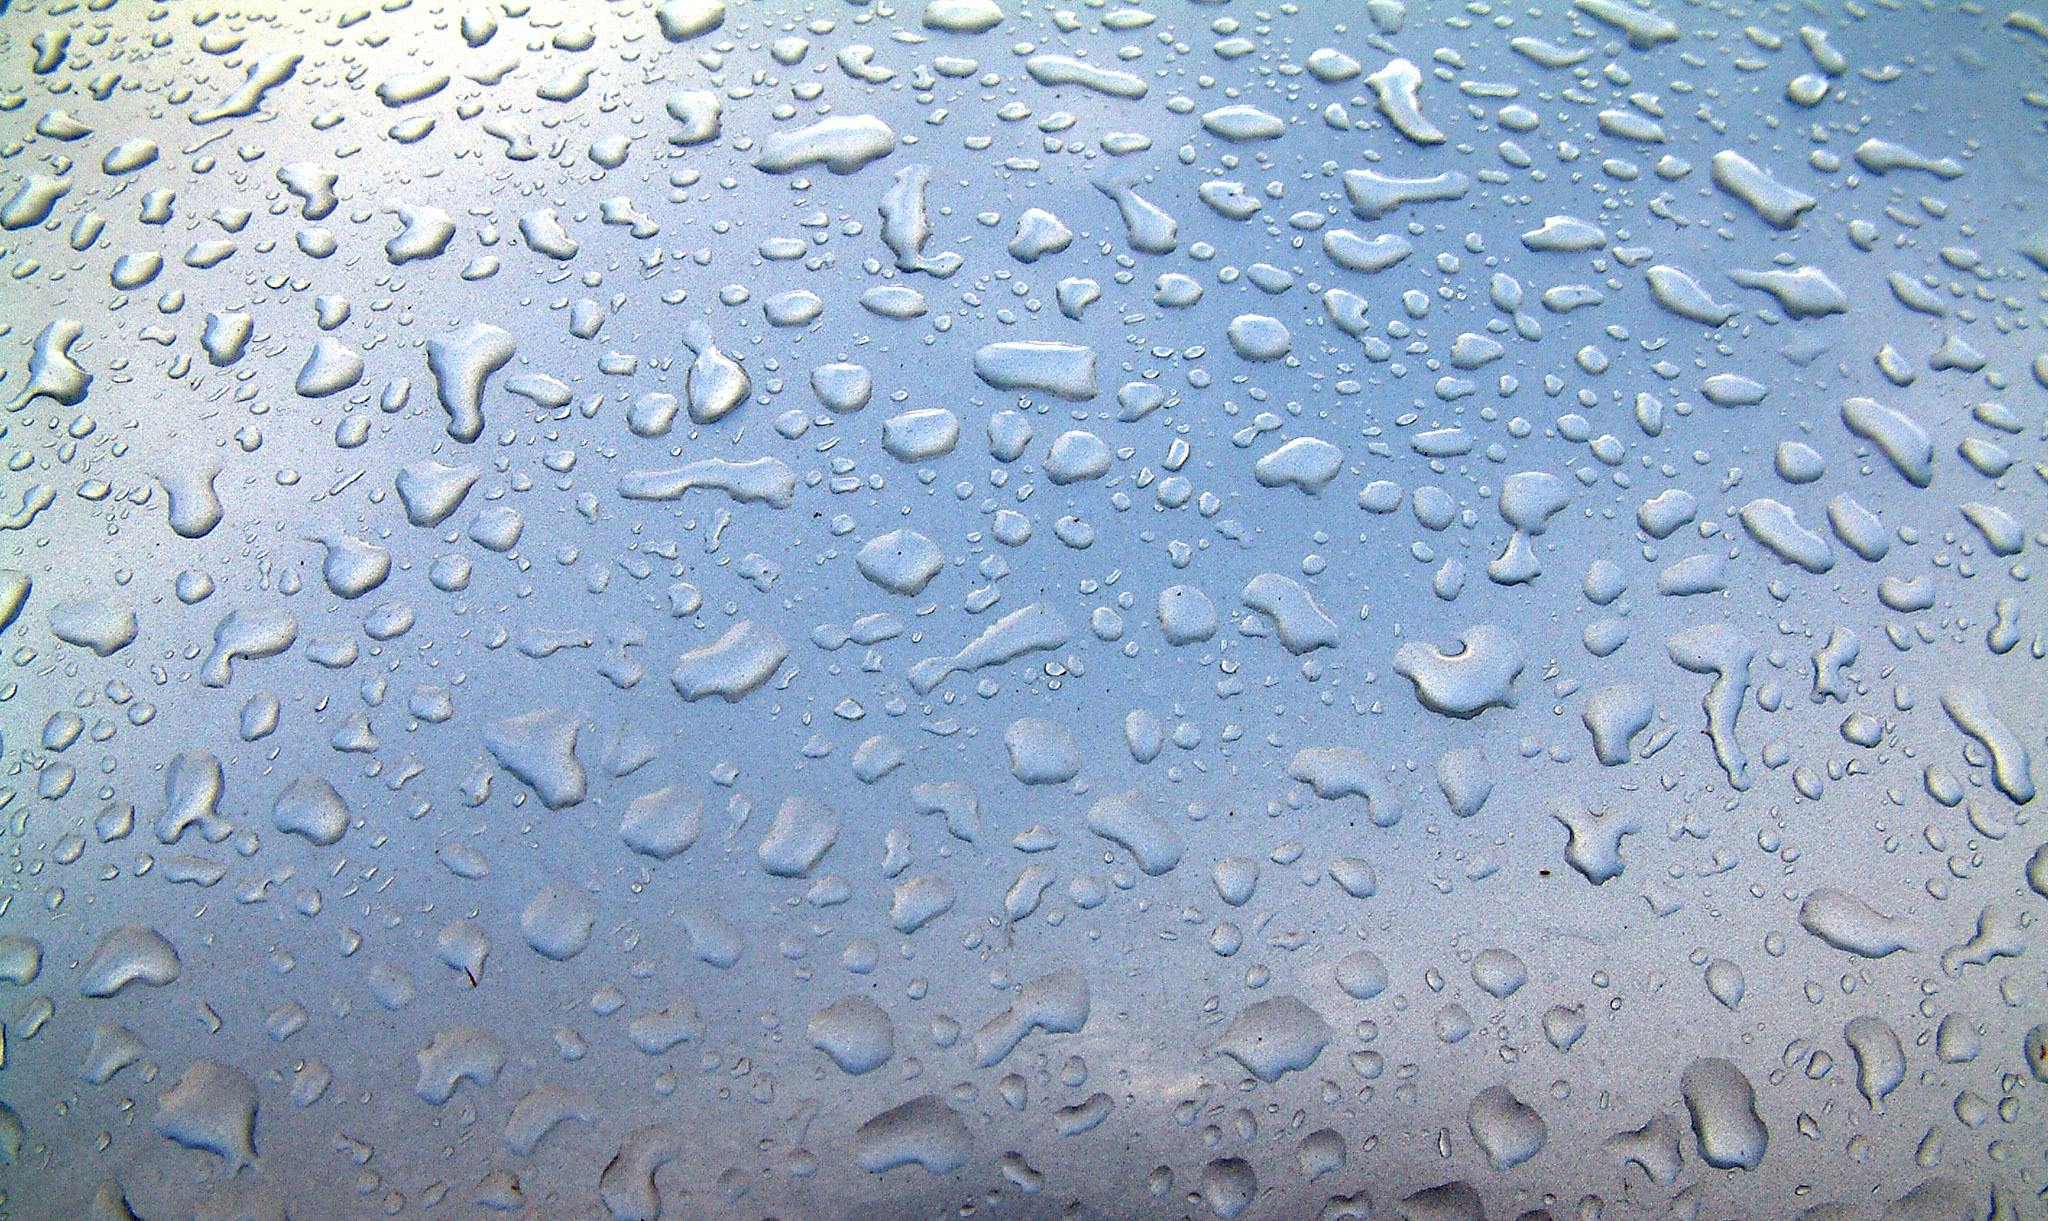 Background of water droplets